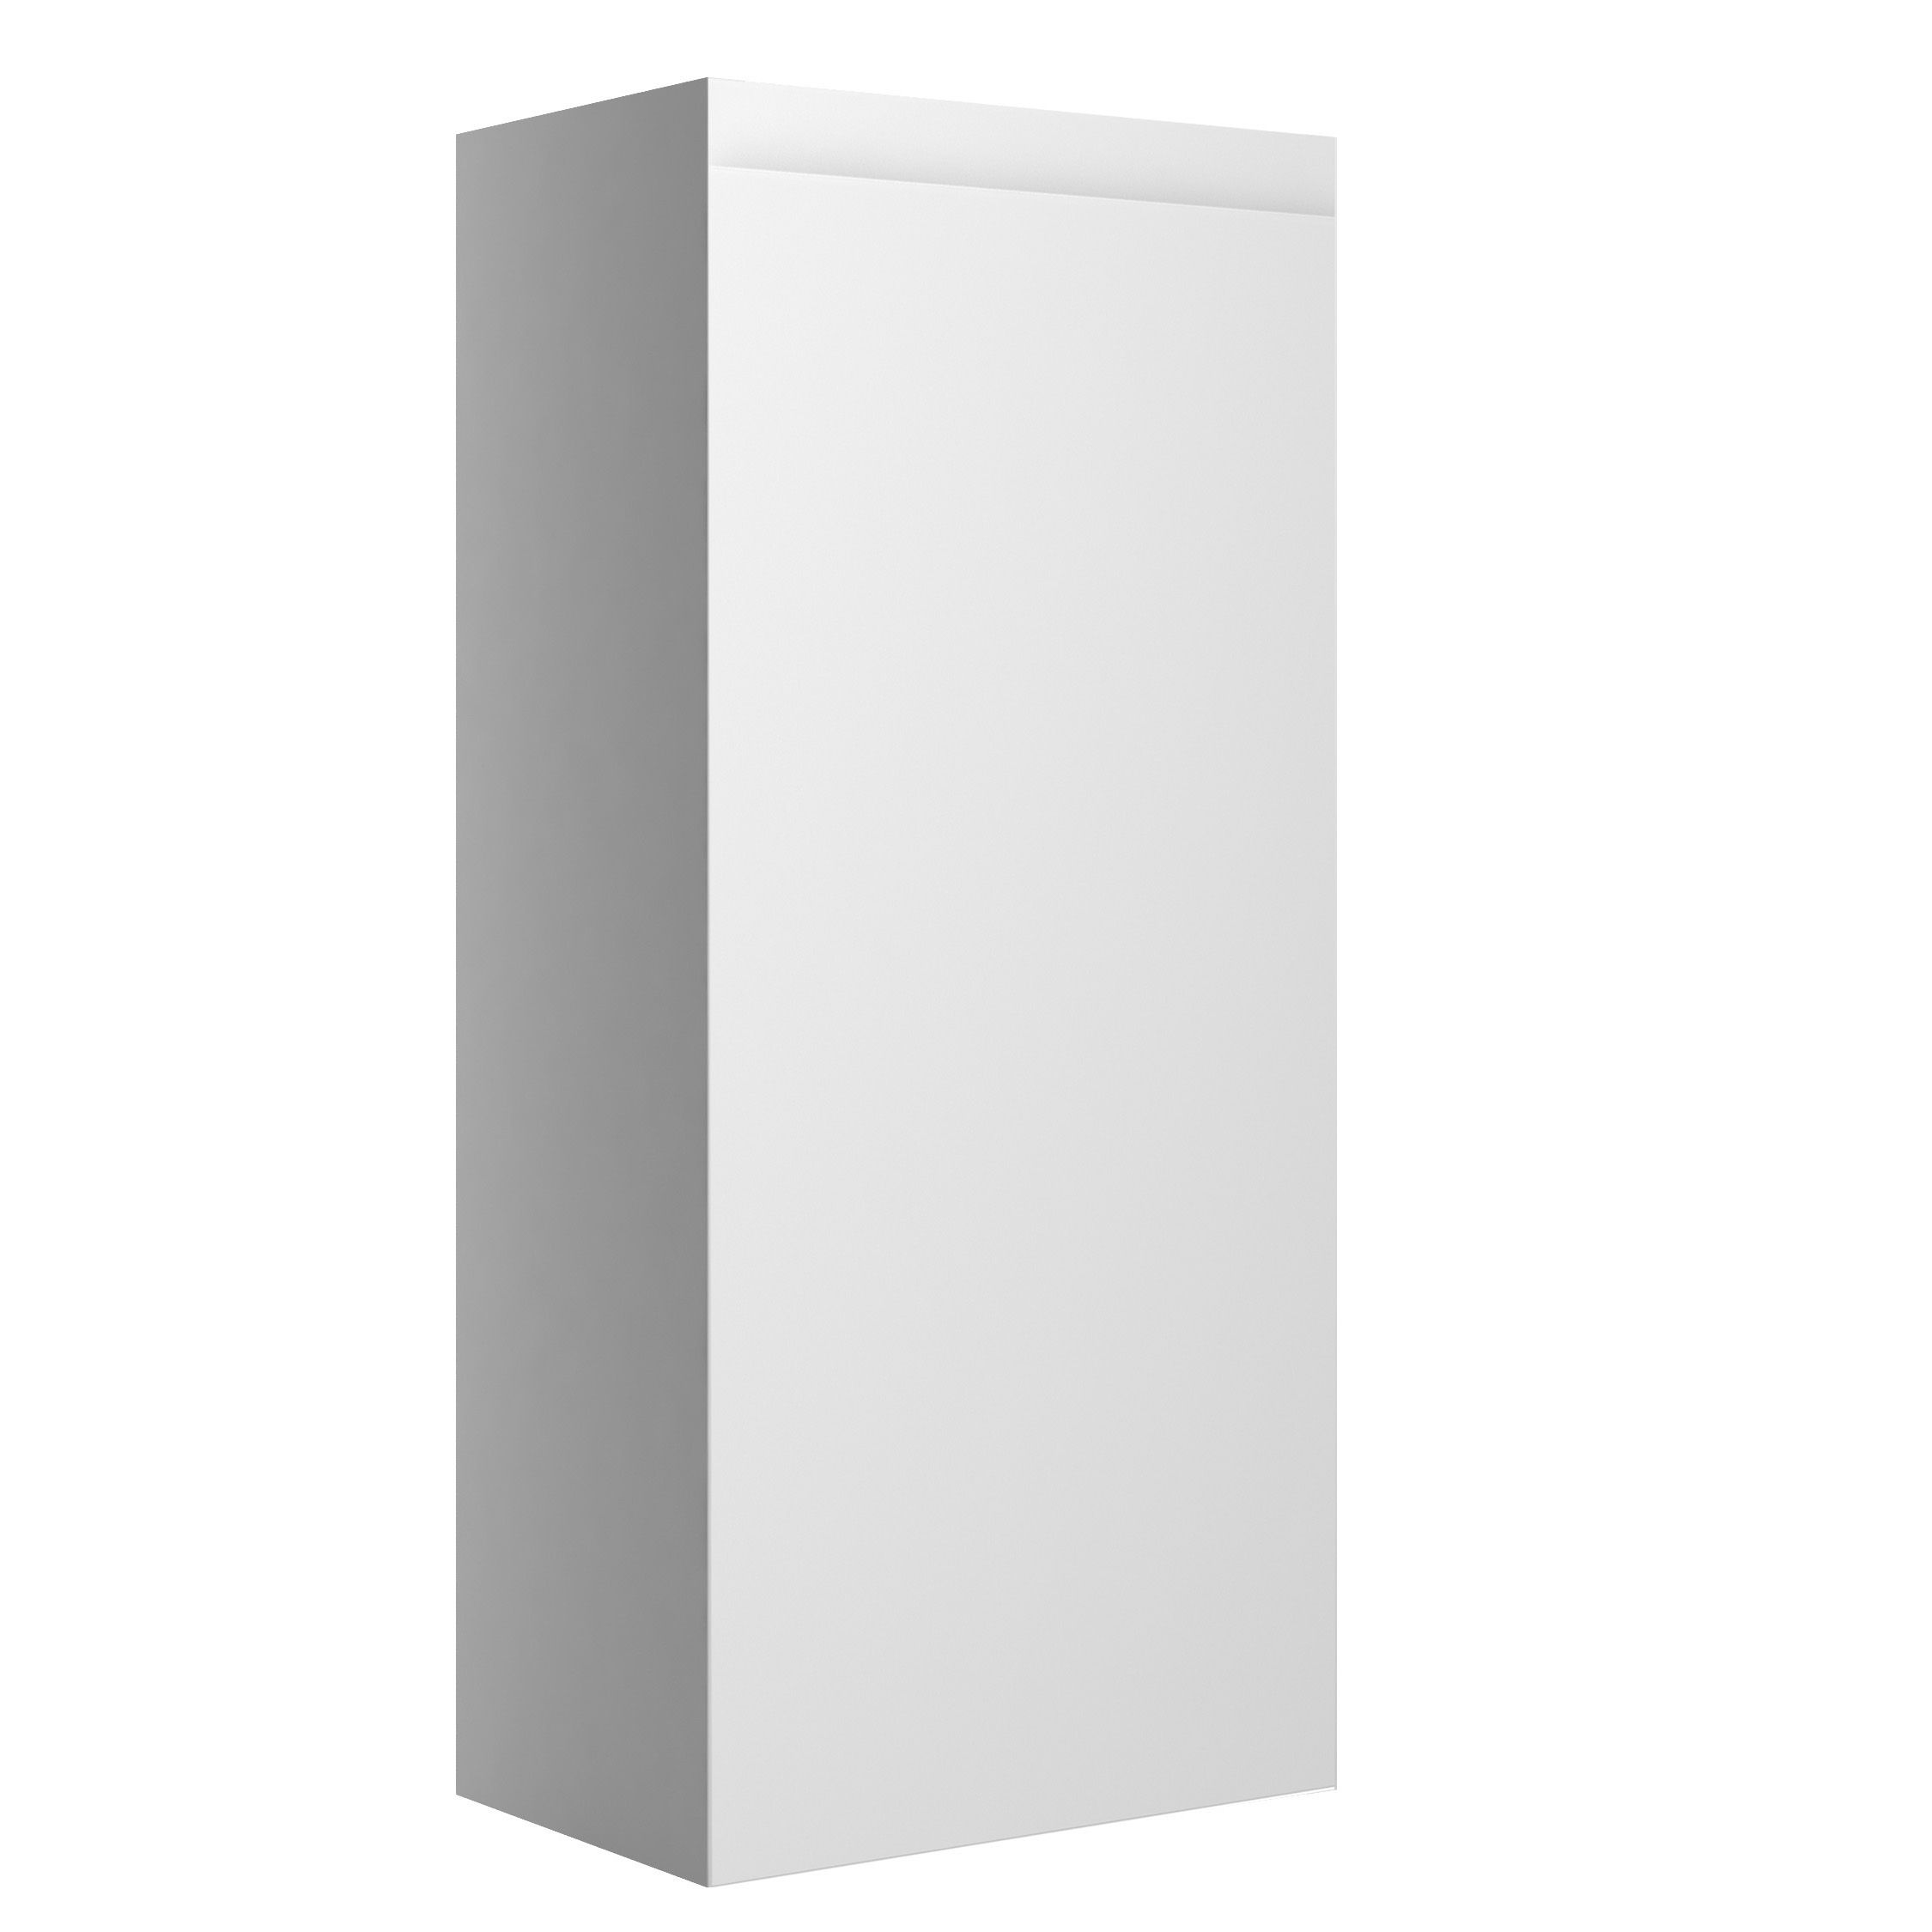 Cooke & Lewis Marletti Gloss White Base Cabinet (W)300mm (H)852mm